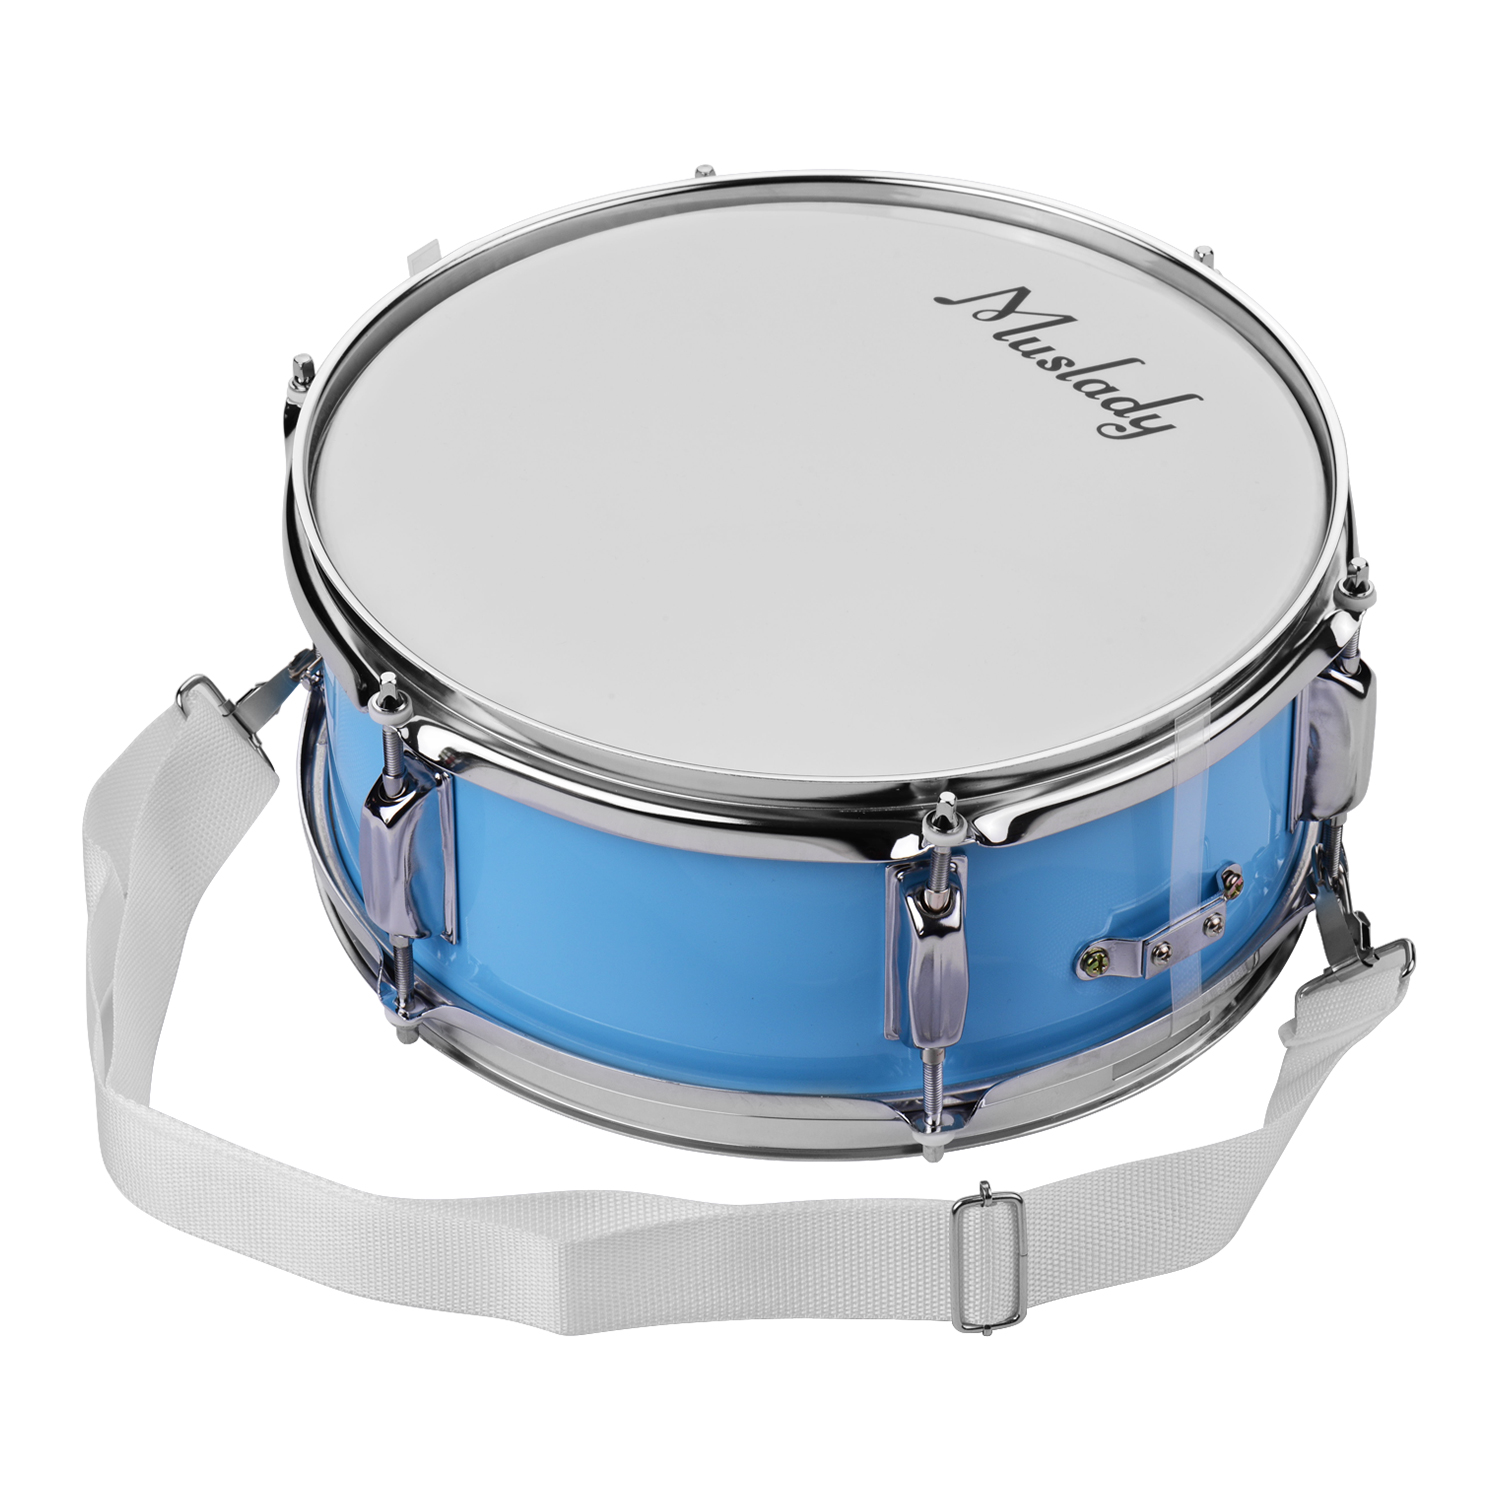 Muslady 12inch Snare Drum Head with Drumsticks Shoulder Strap Drum Key for  Student Band 